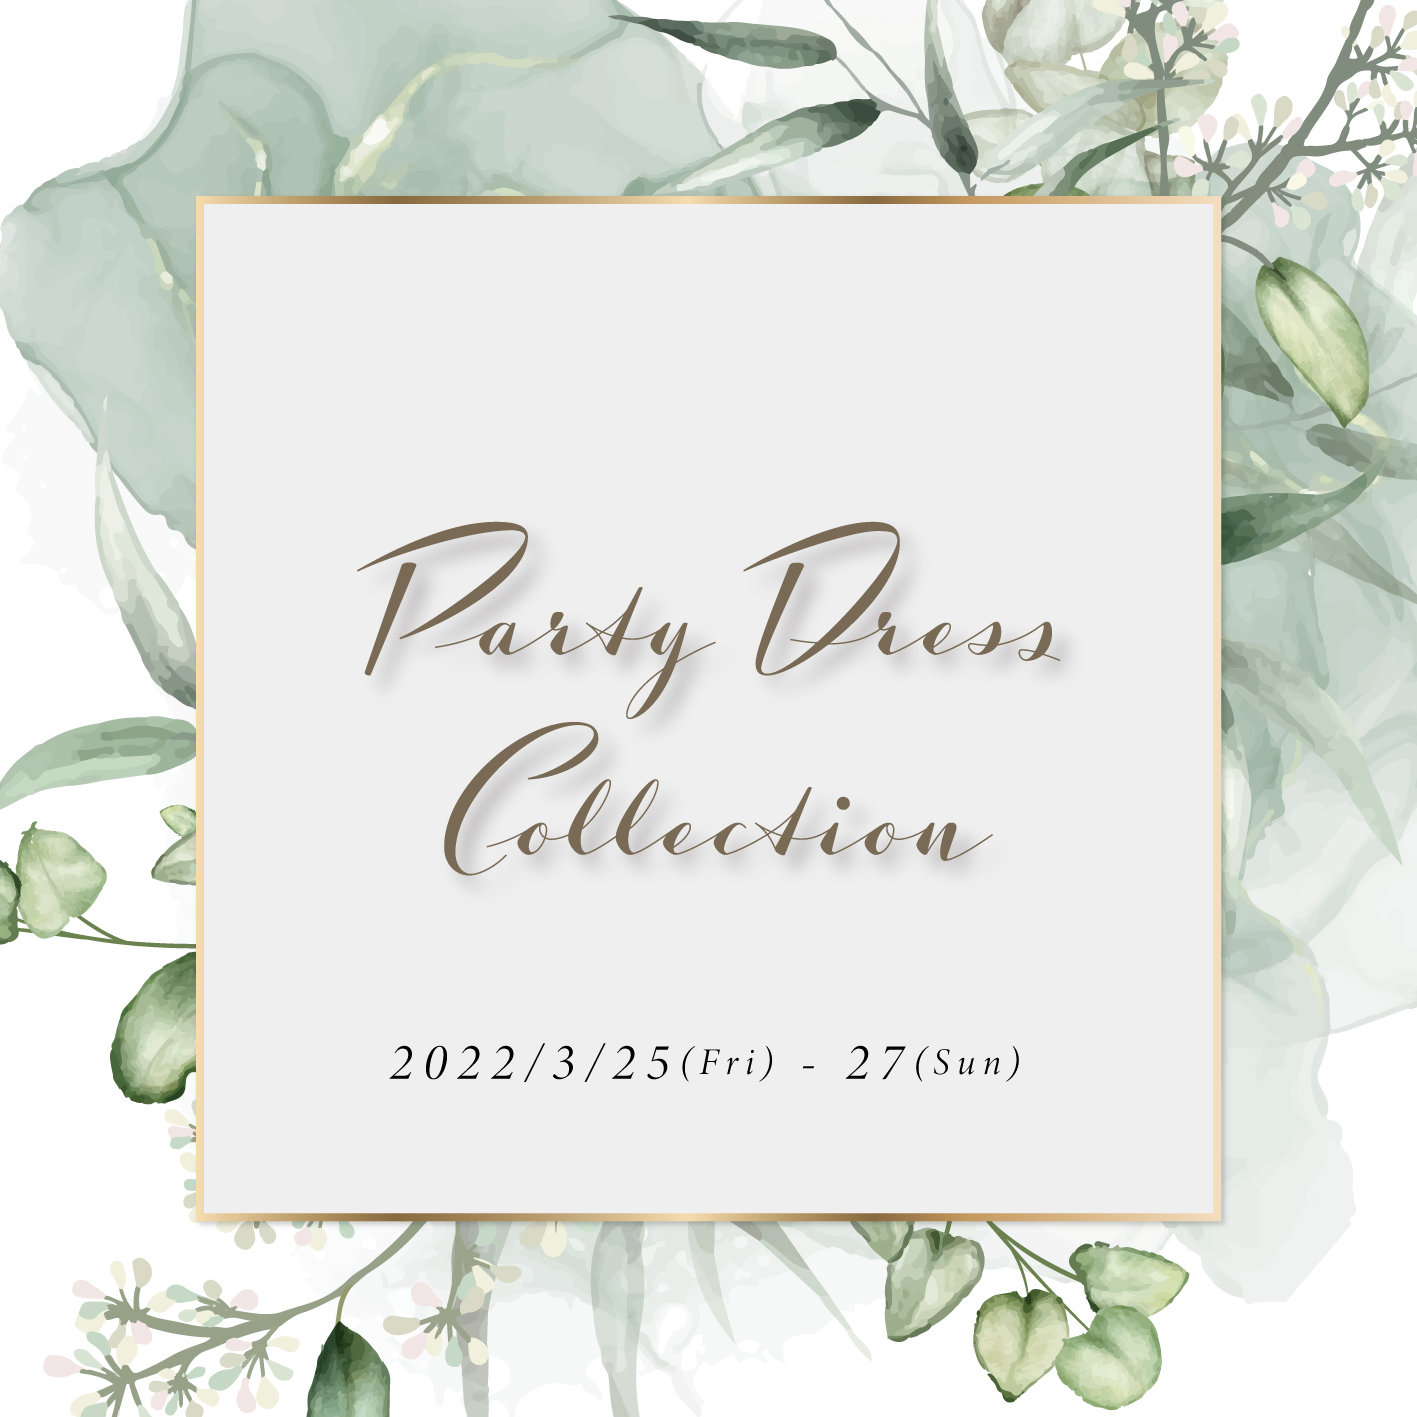 .｡*ﾟ+.*.｡Party Dress Collectionのお知らせ｡*ﾟ+.*.｡　